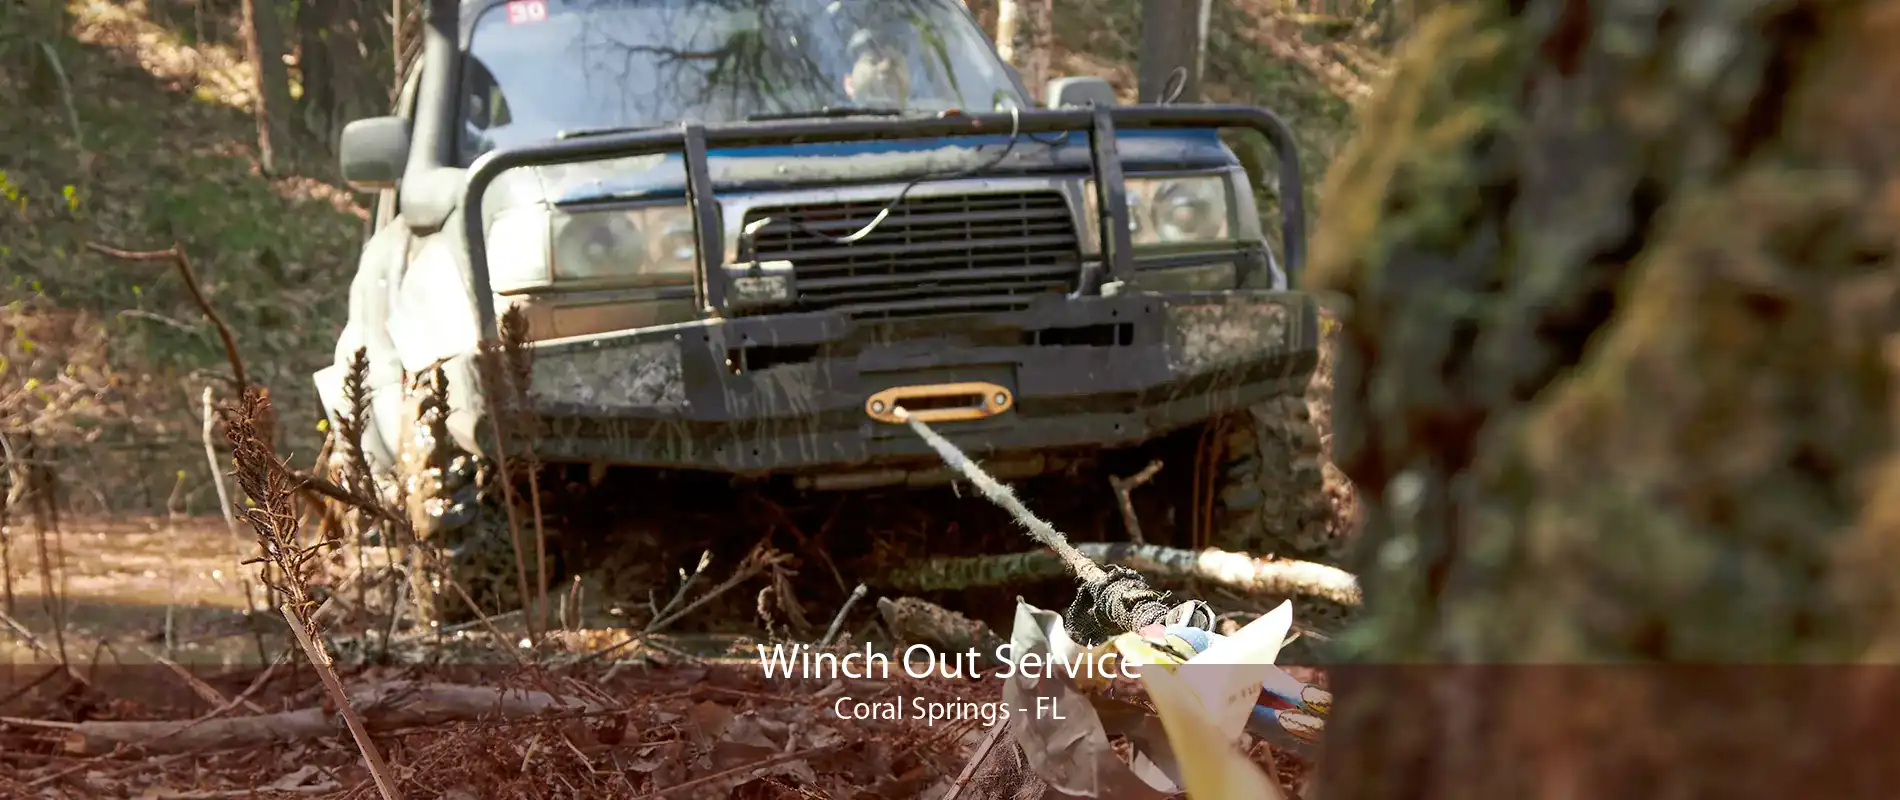 Winch Out Service Coral Springs - FL